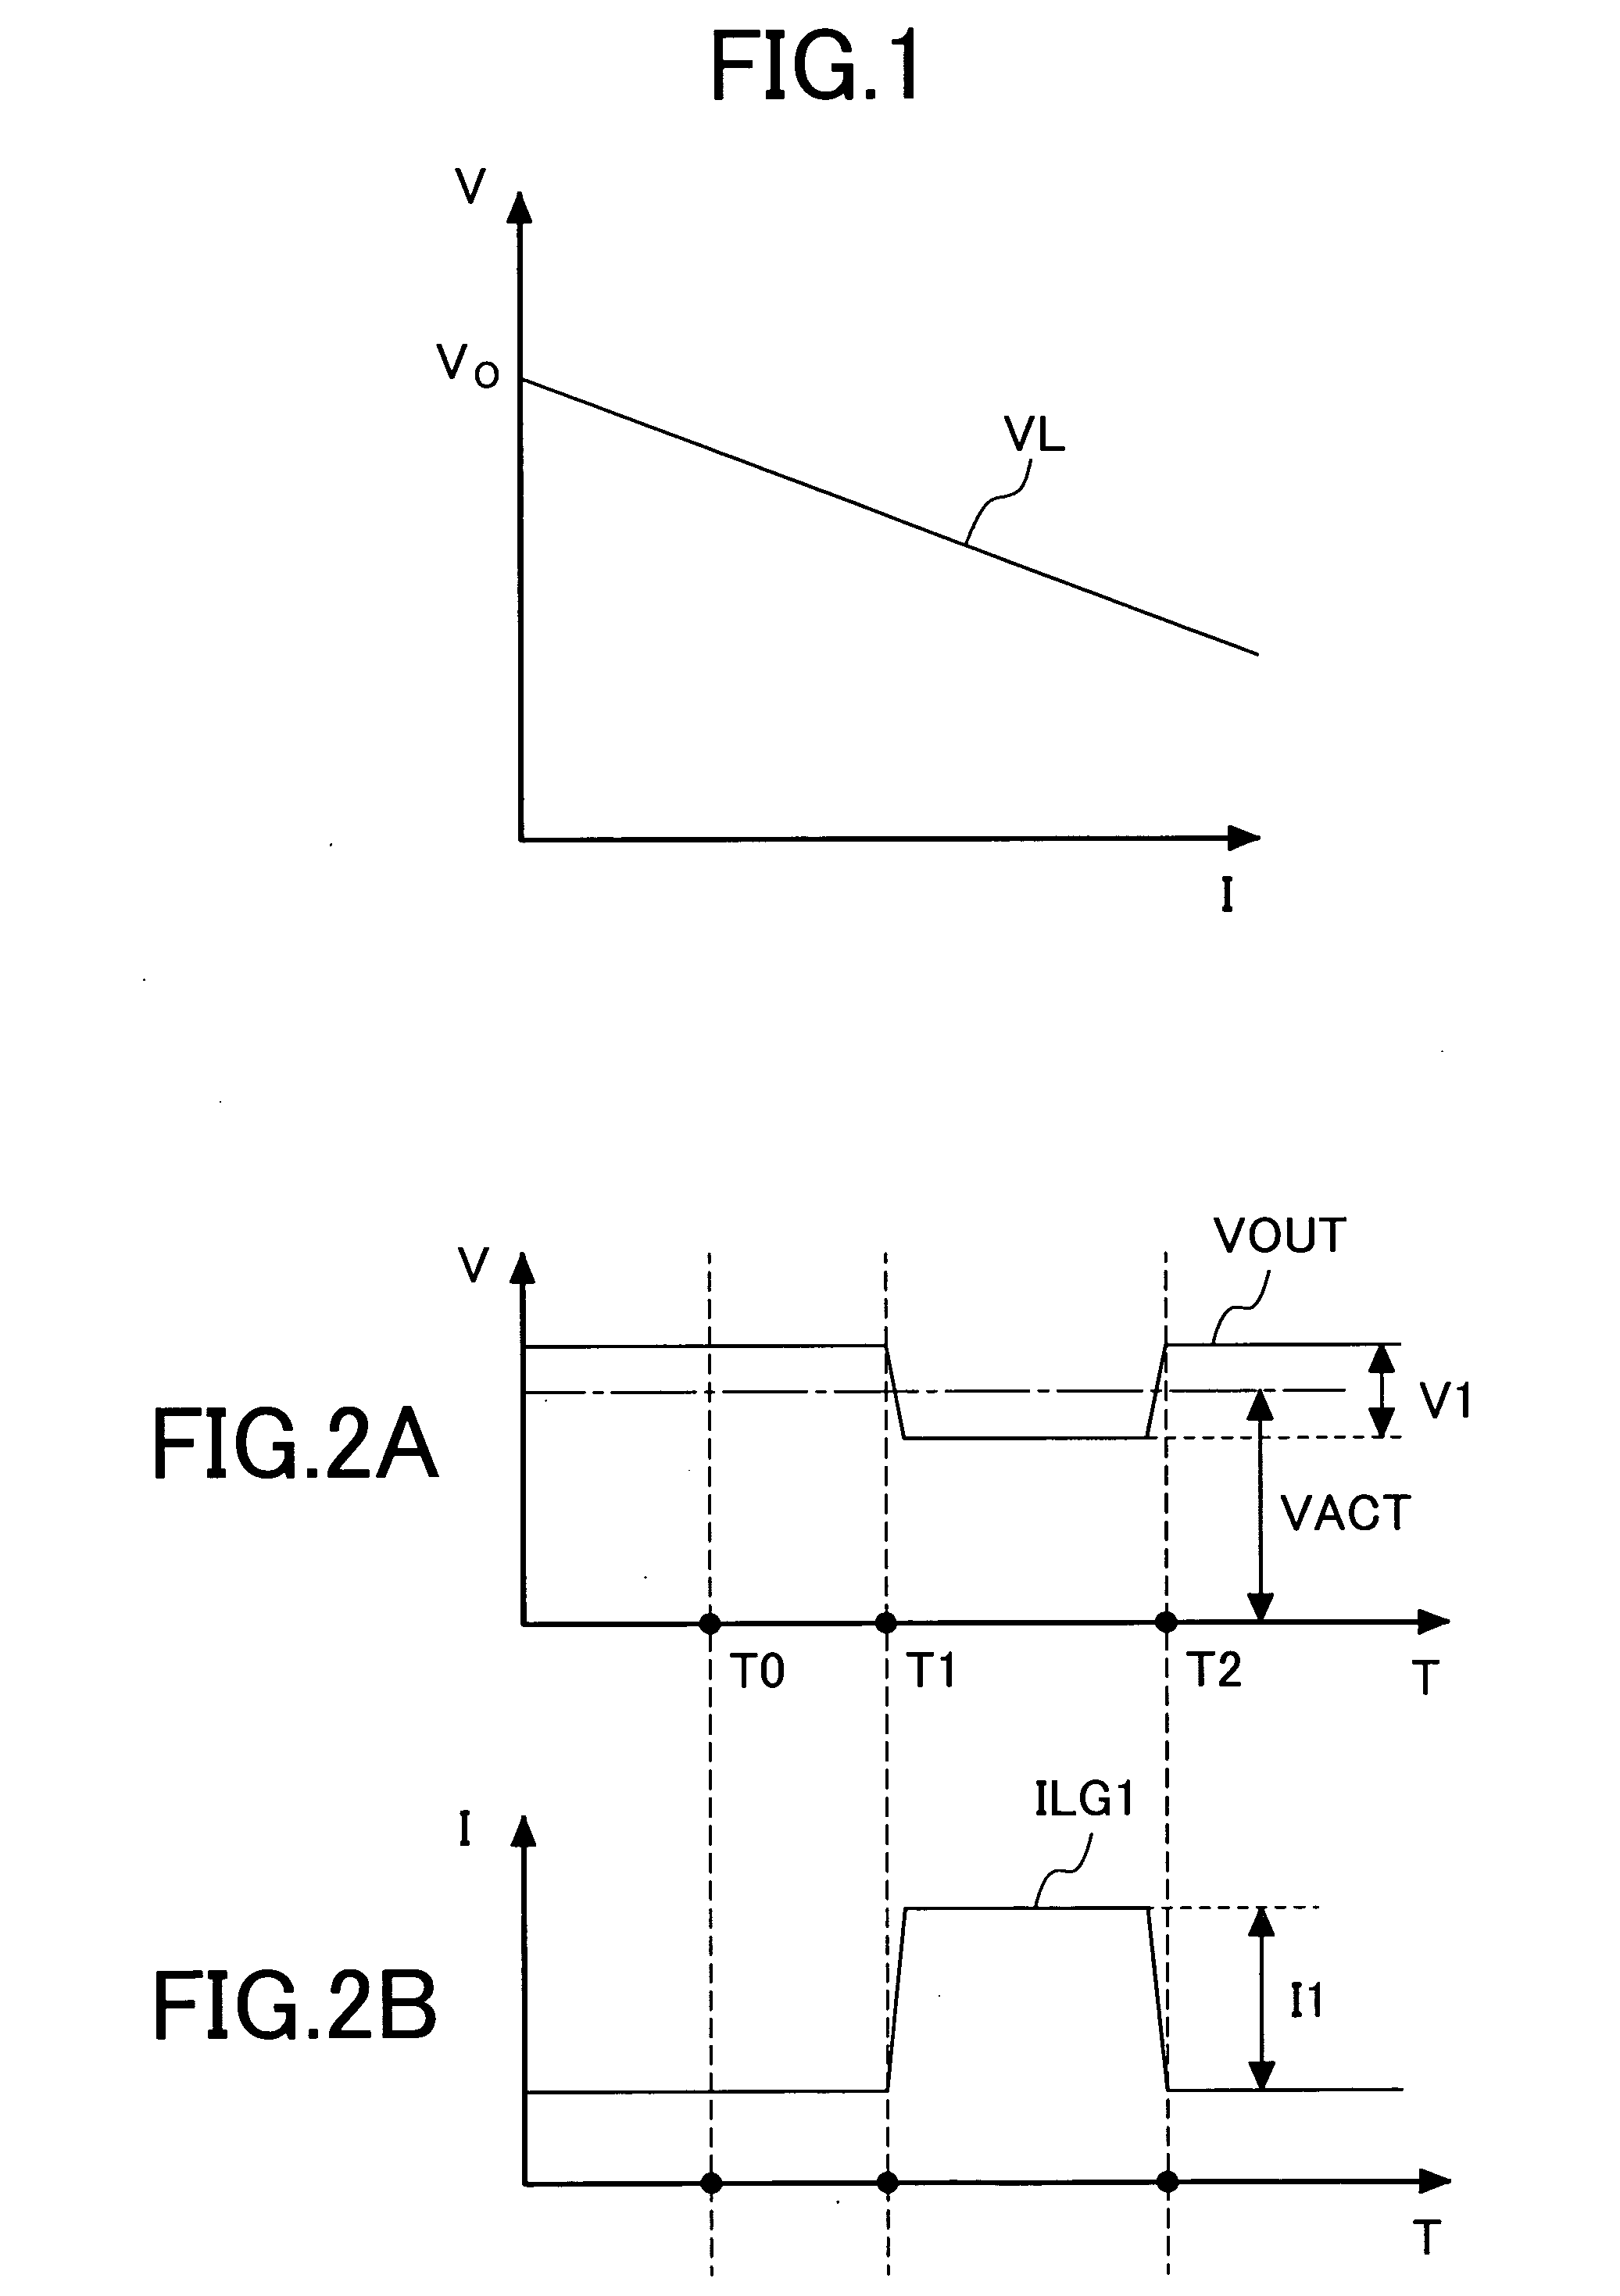 Semiconductor device and ic card